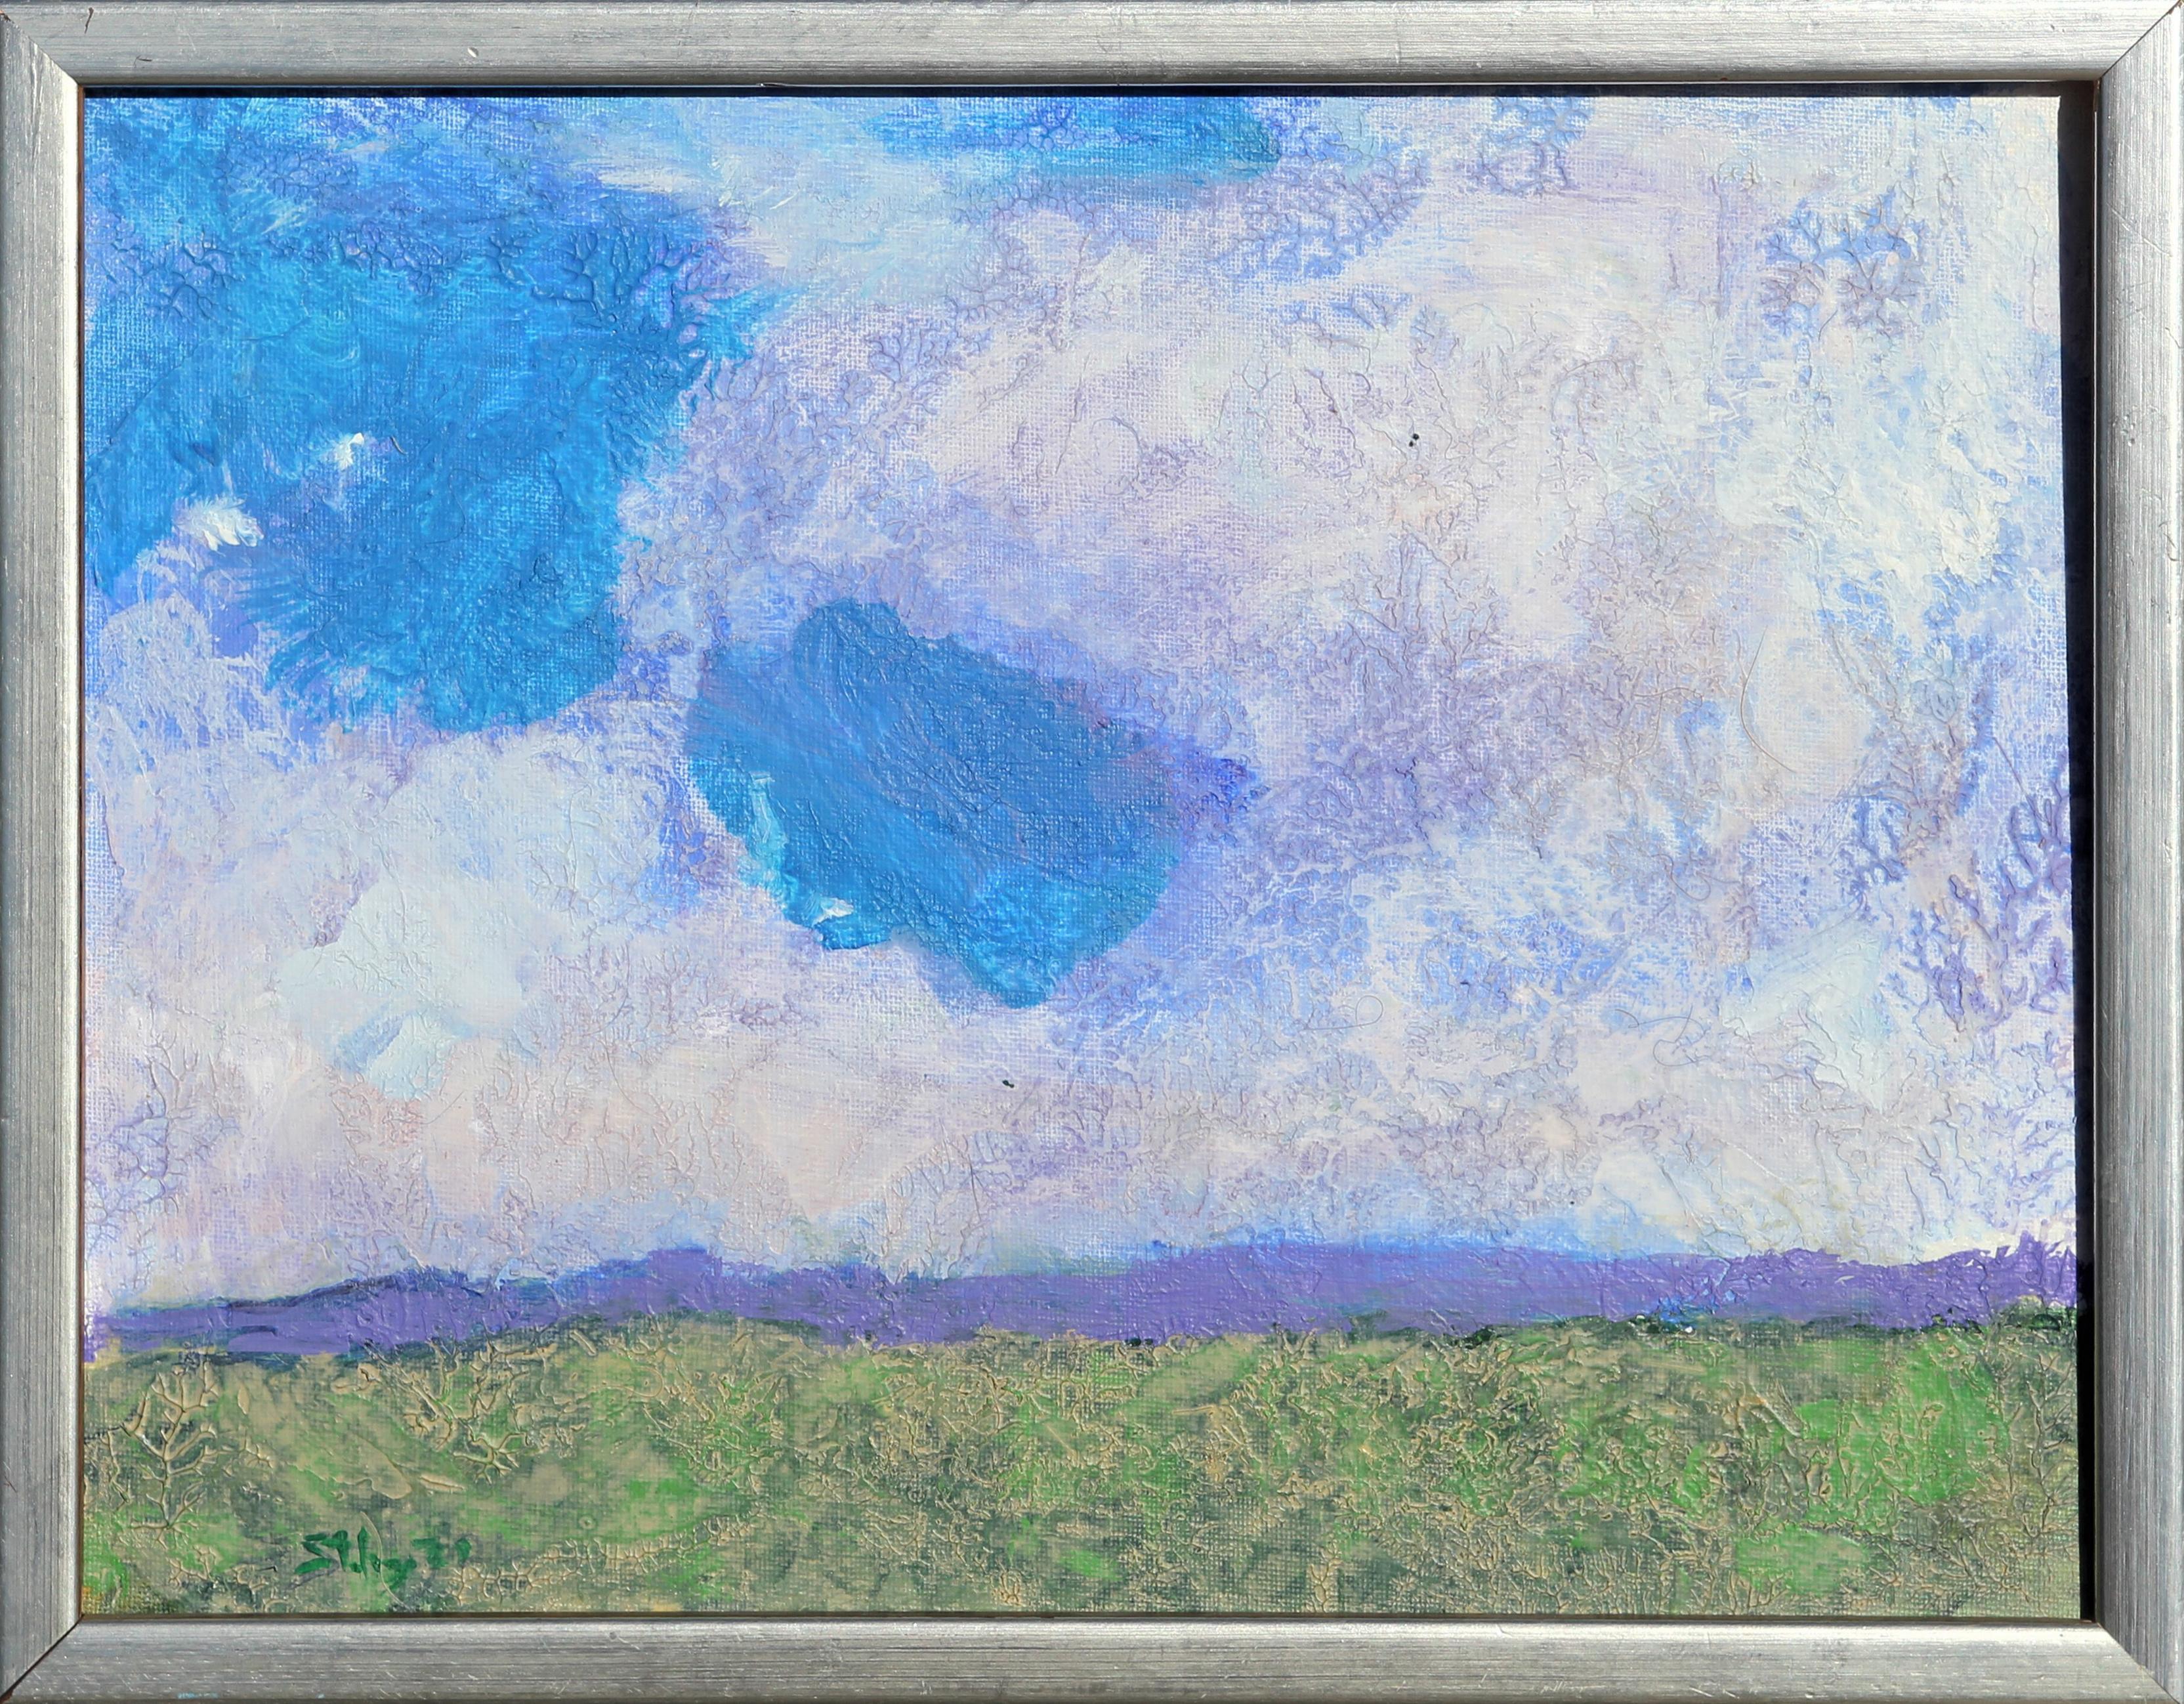 Earl Staley Landscape Painting - "Landscape 2" Colorful Contemporary Southern Abstract Landscape and Sky Painting